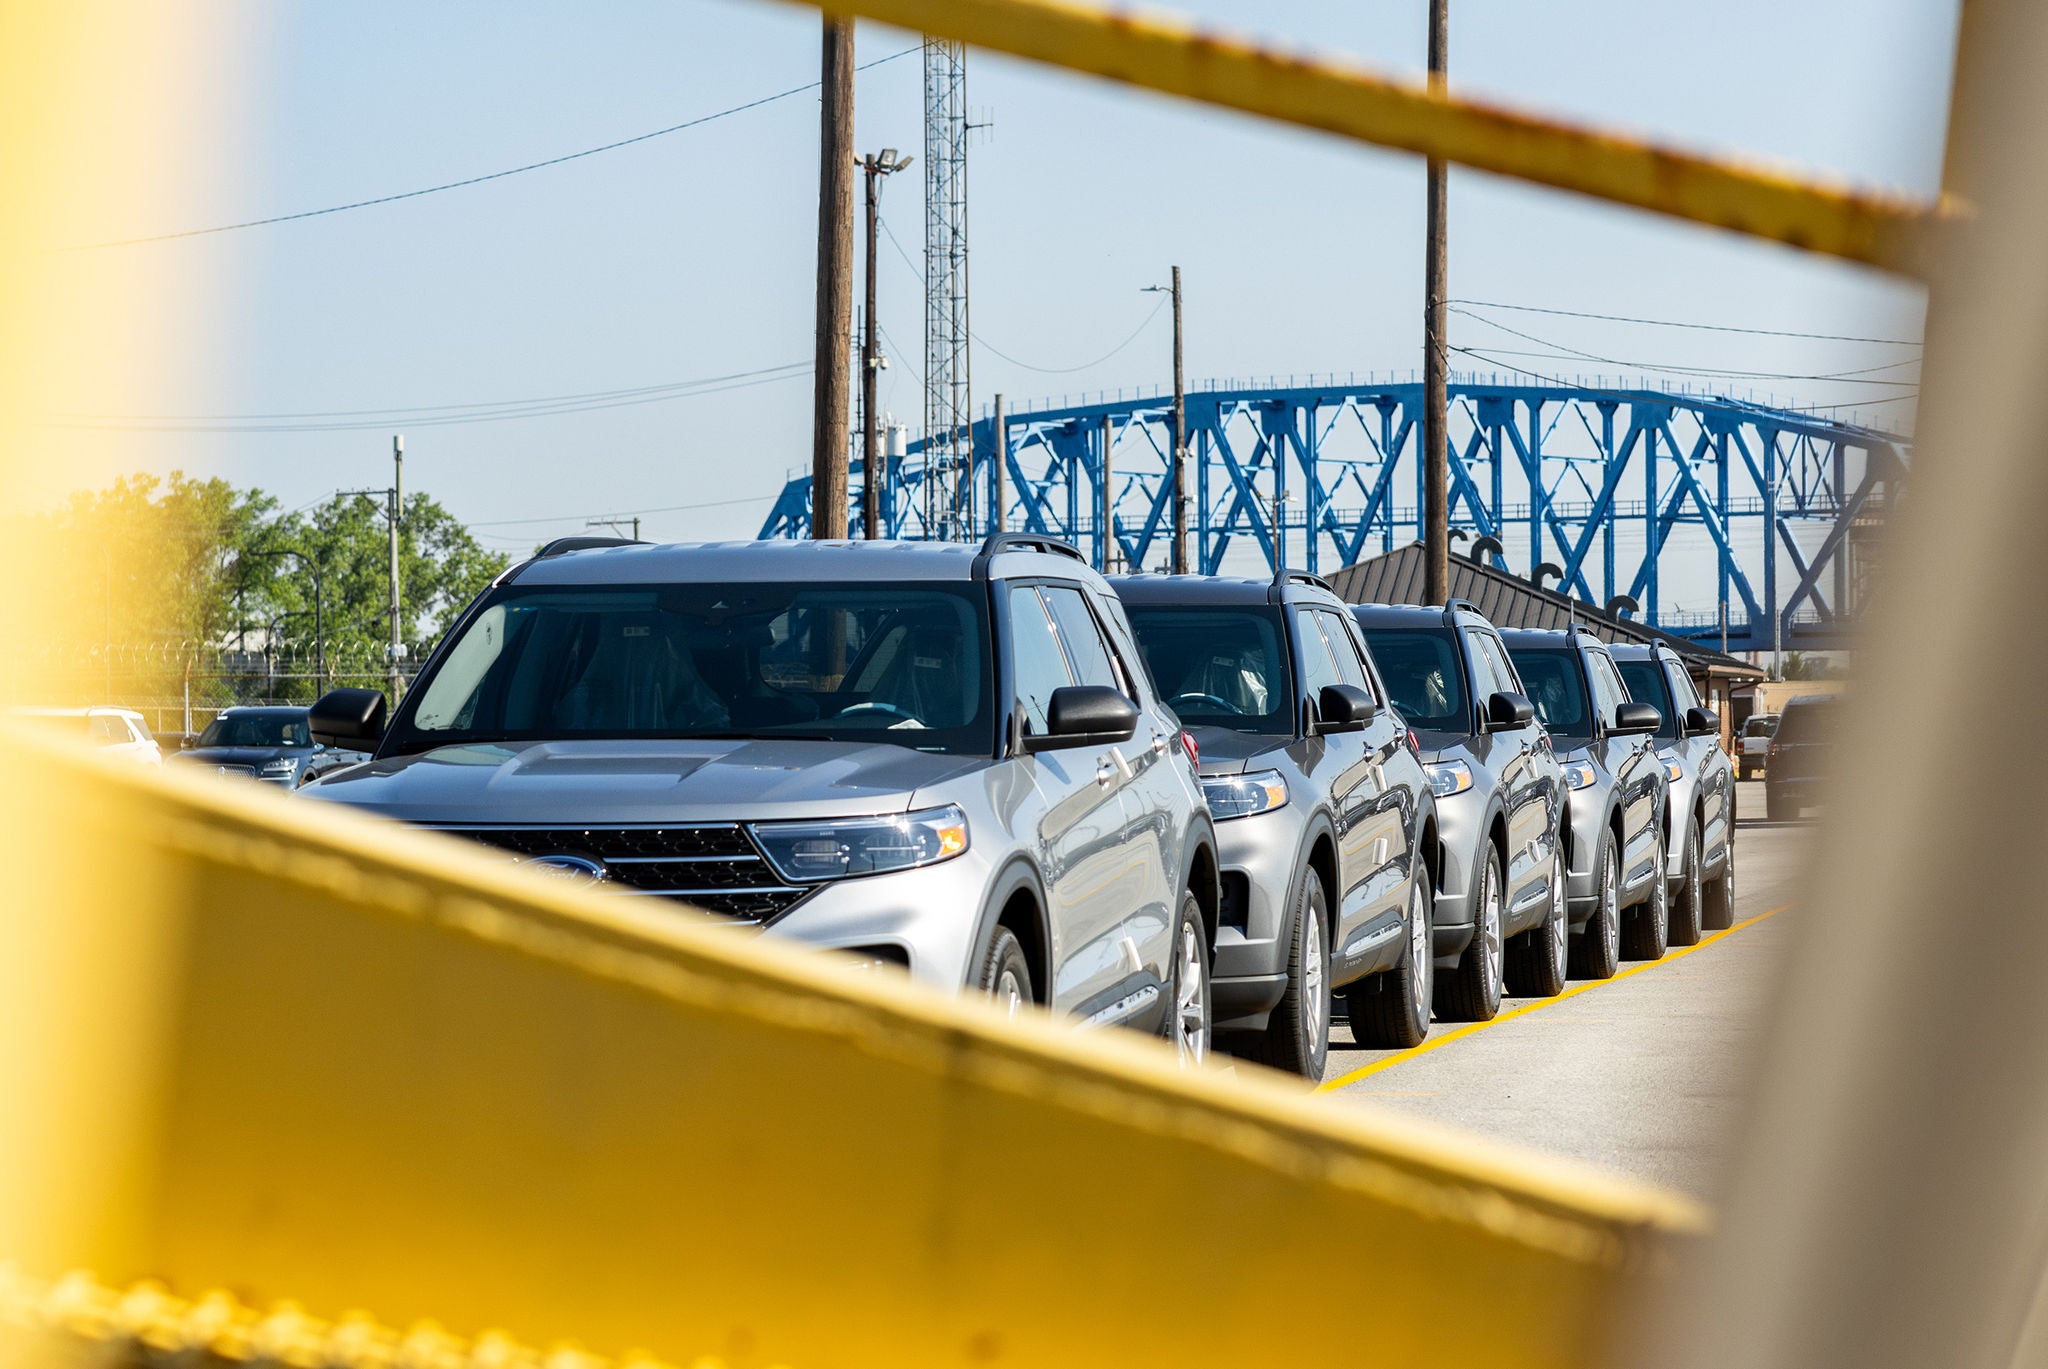 Line of cars viewed through a yellow barrier helping to find your shipping industry